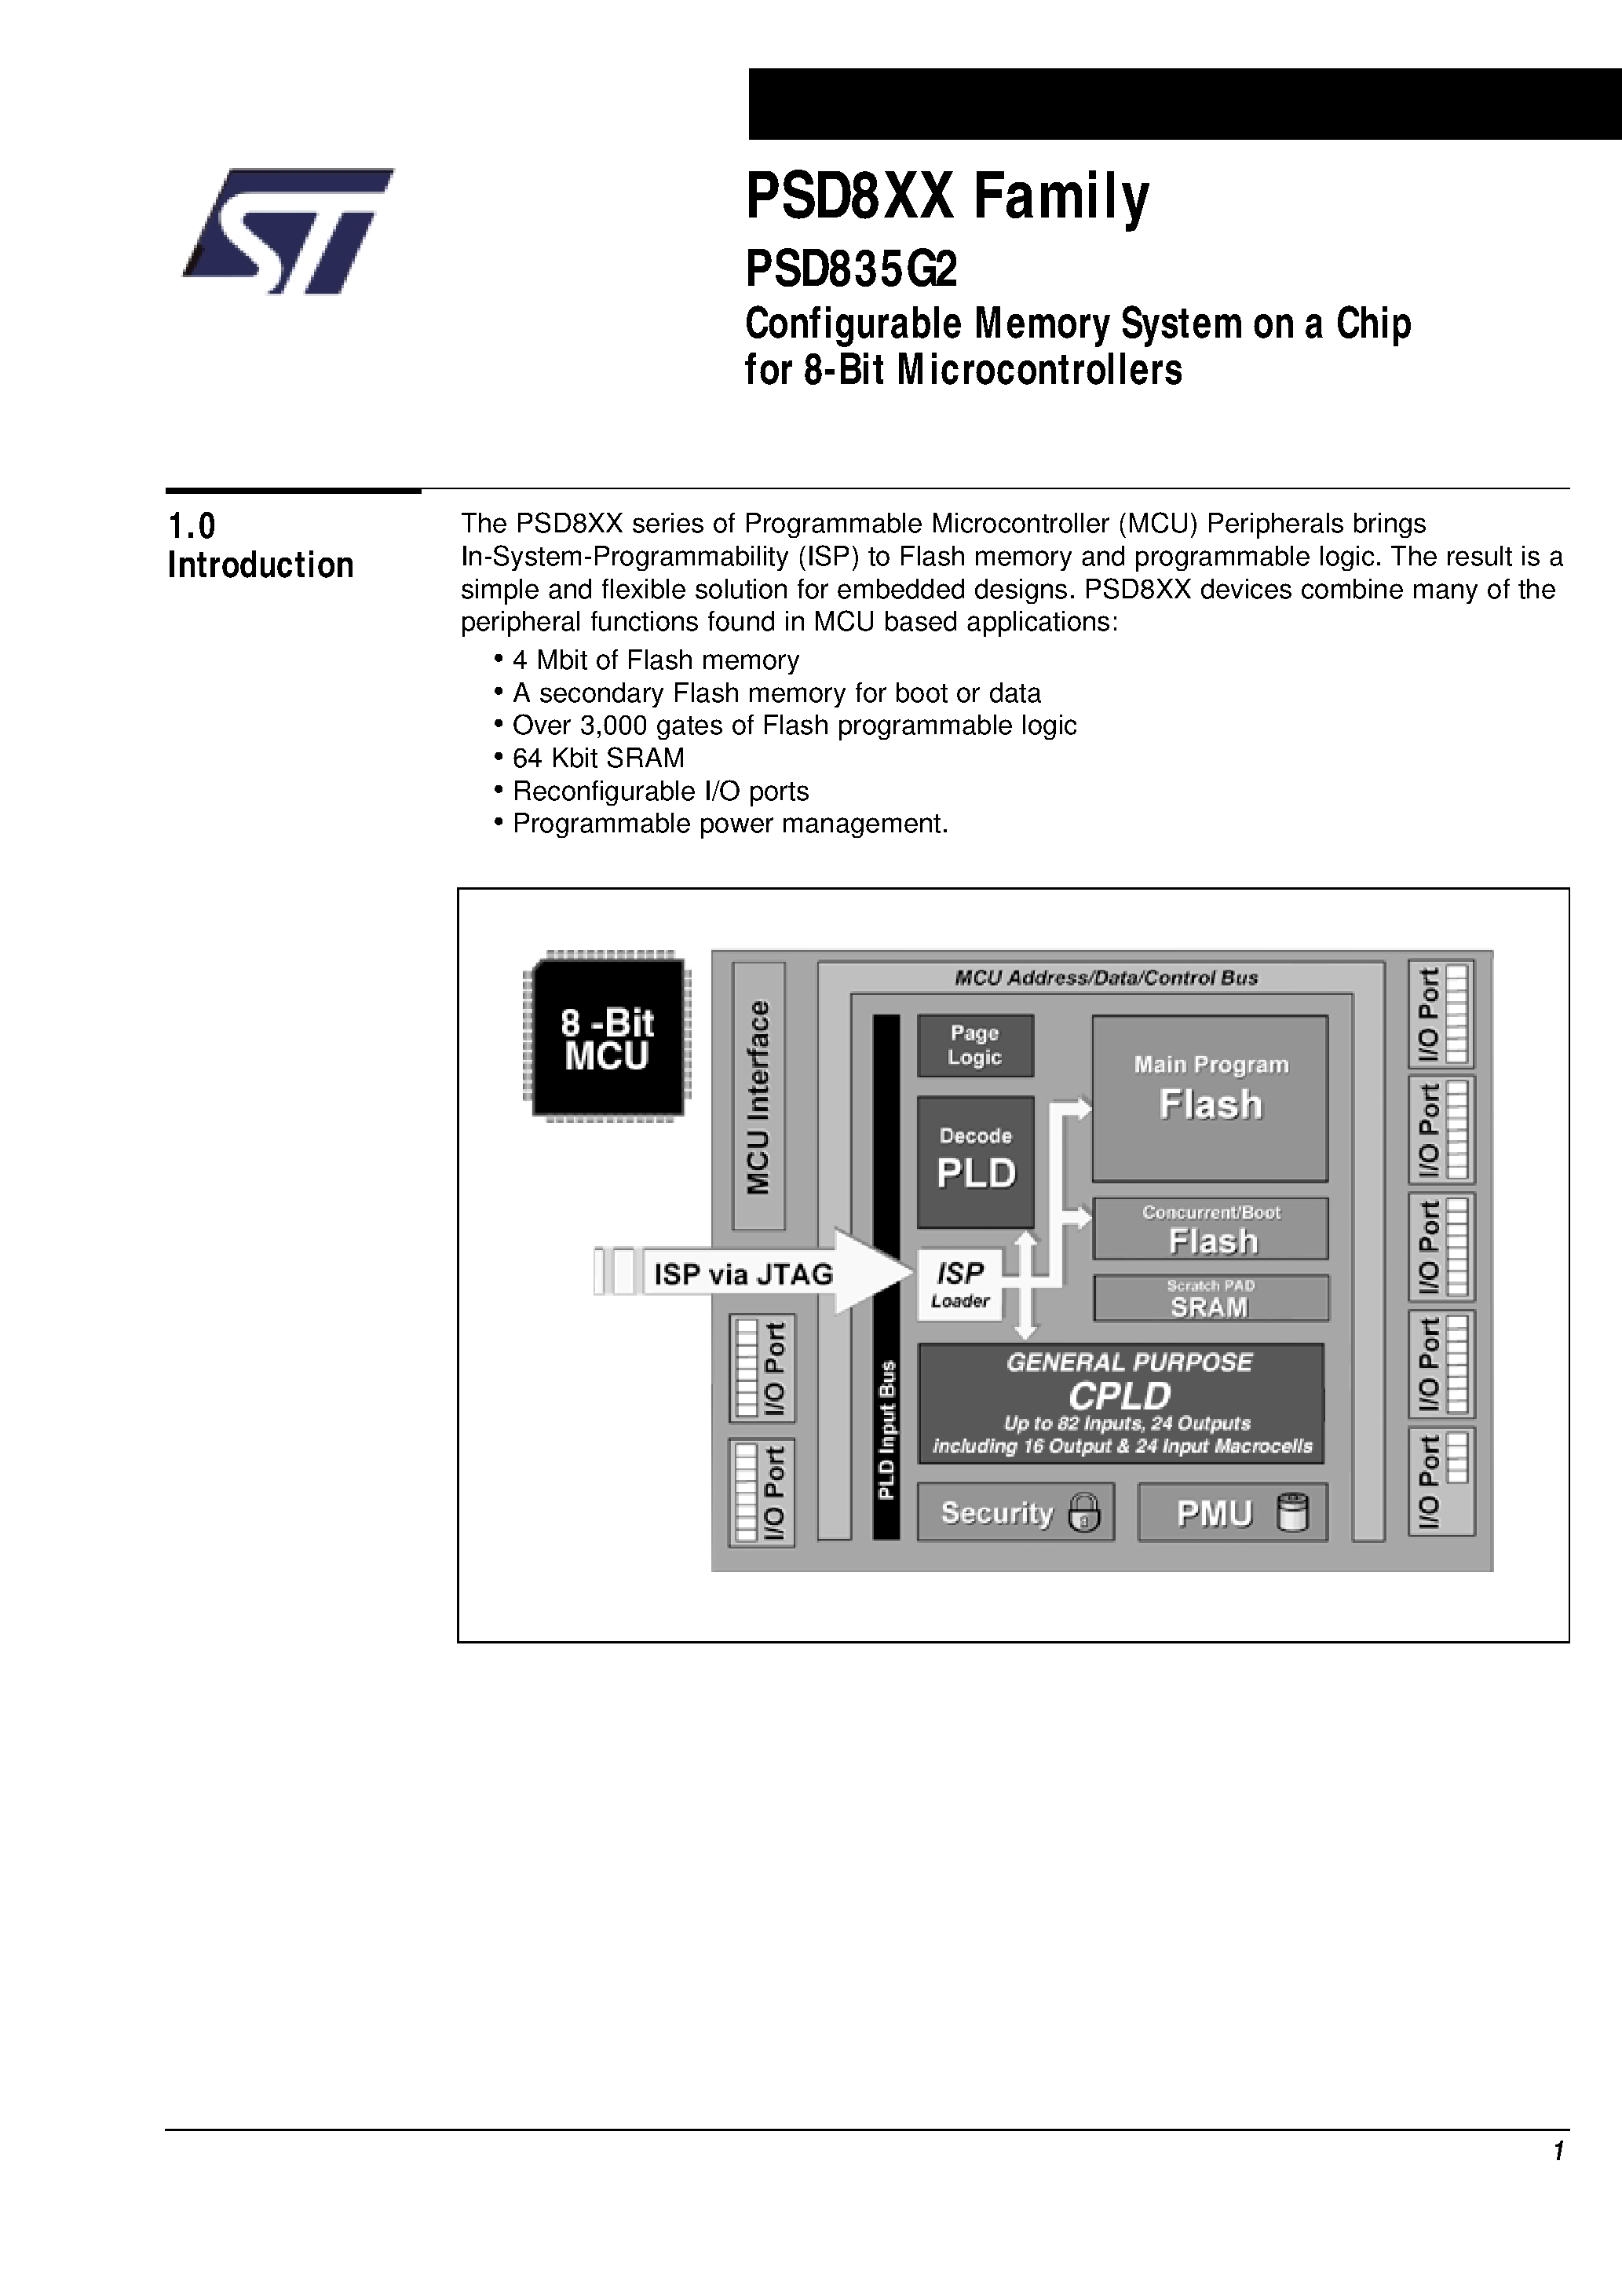 Datasheet PSD835F1V-A-12UI - Configurable Memory System on a Chip for 8-Bit Microcontrollers page 2